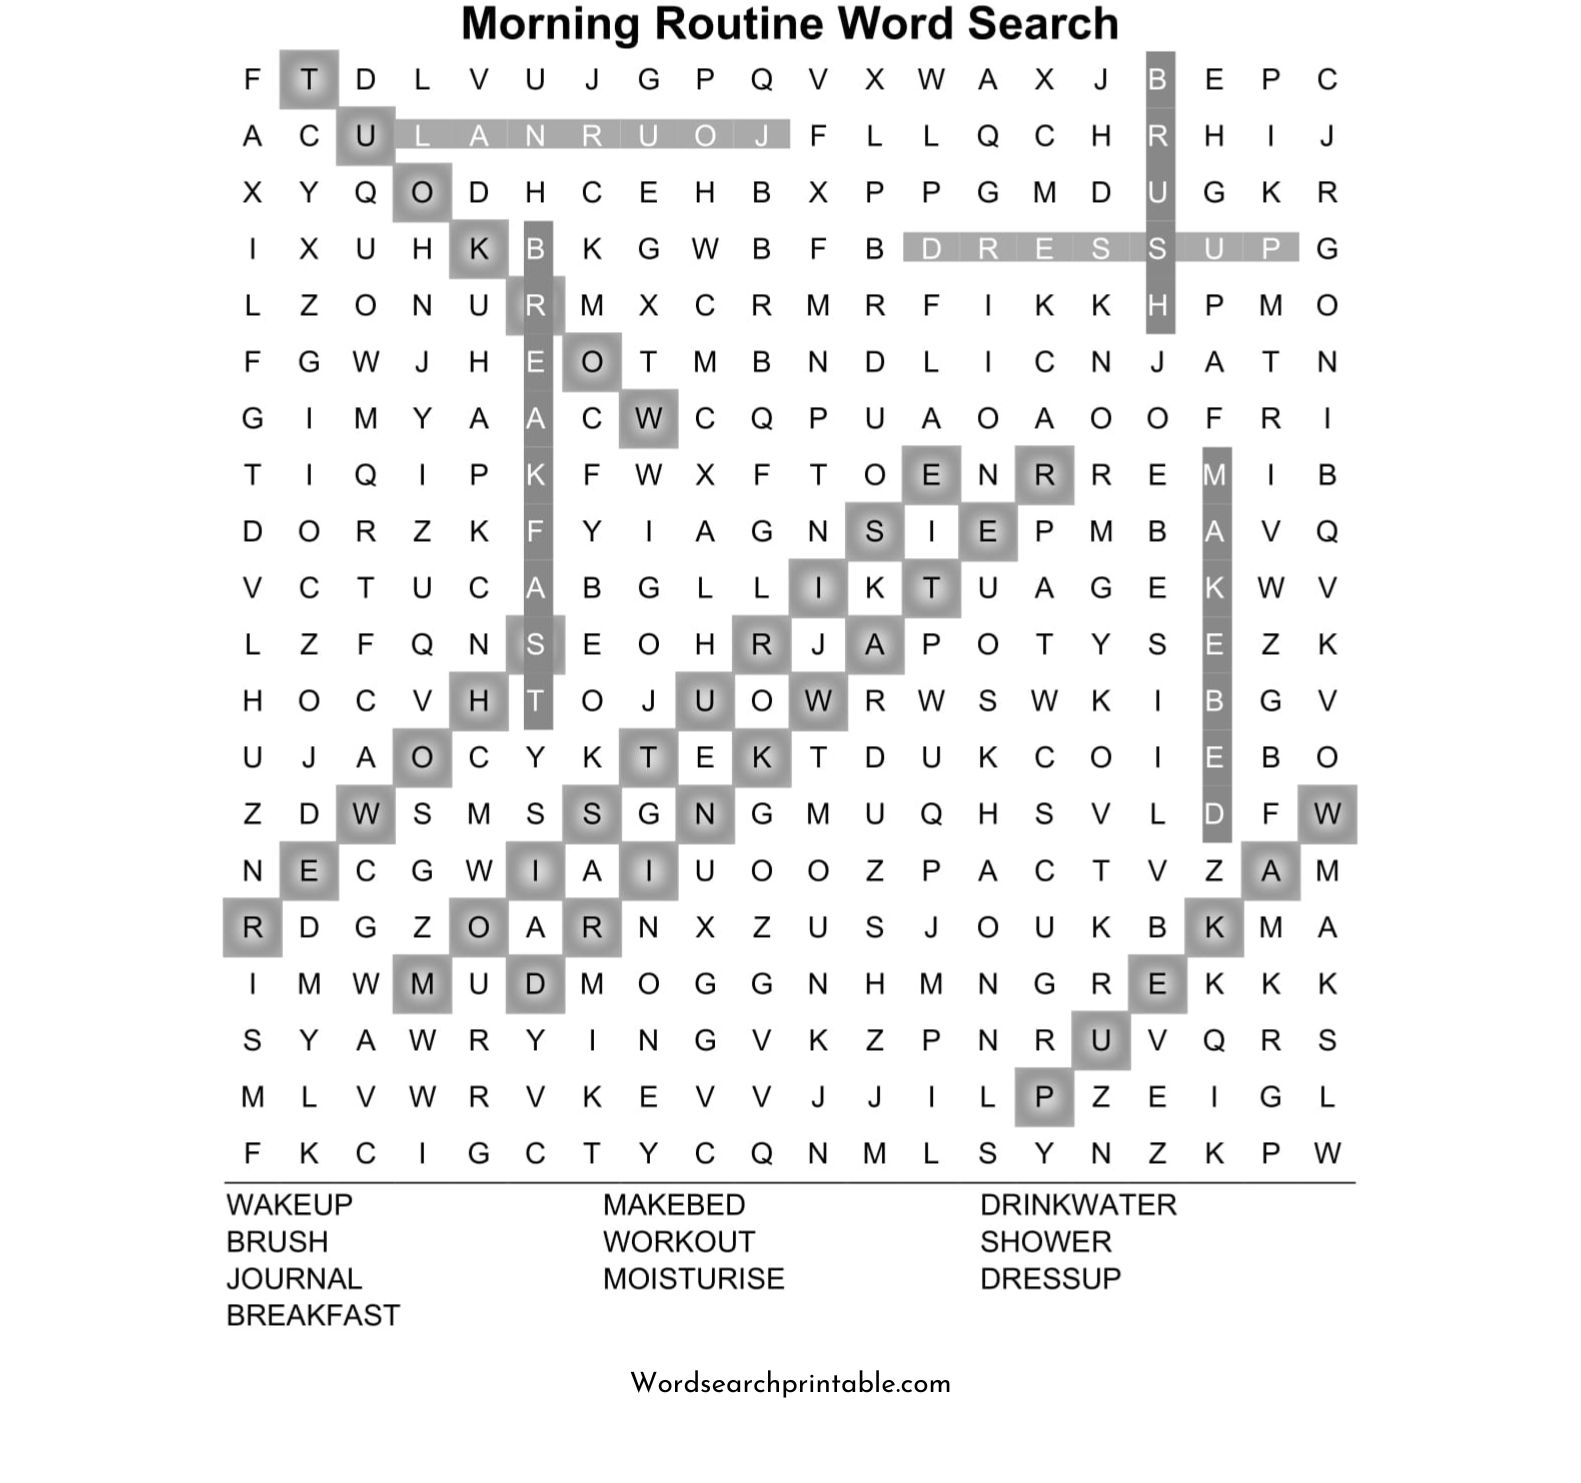 morning routine word search puzzle solution